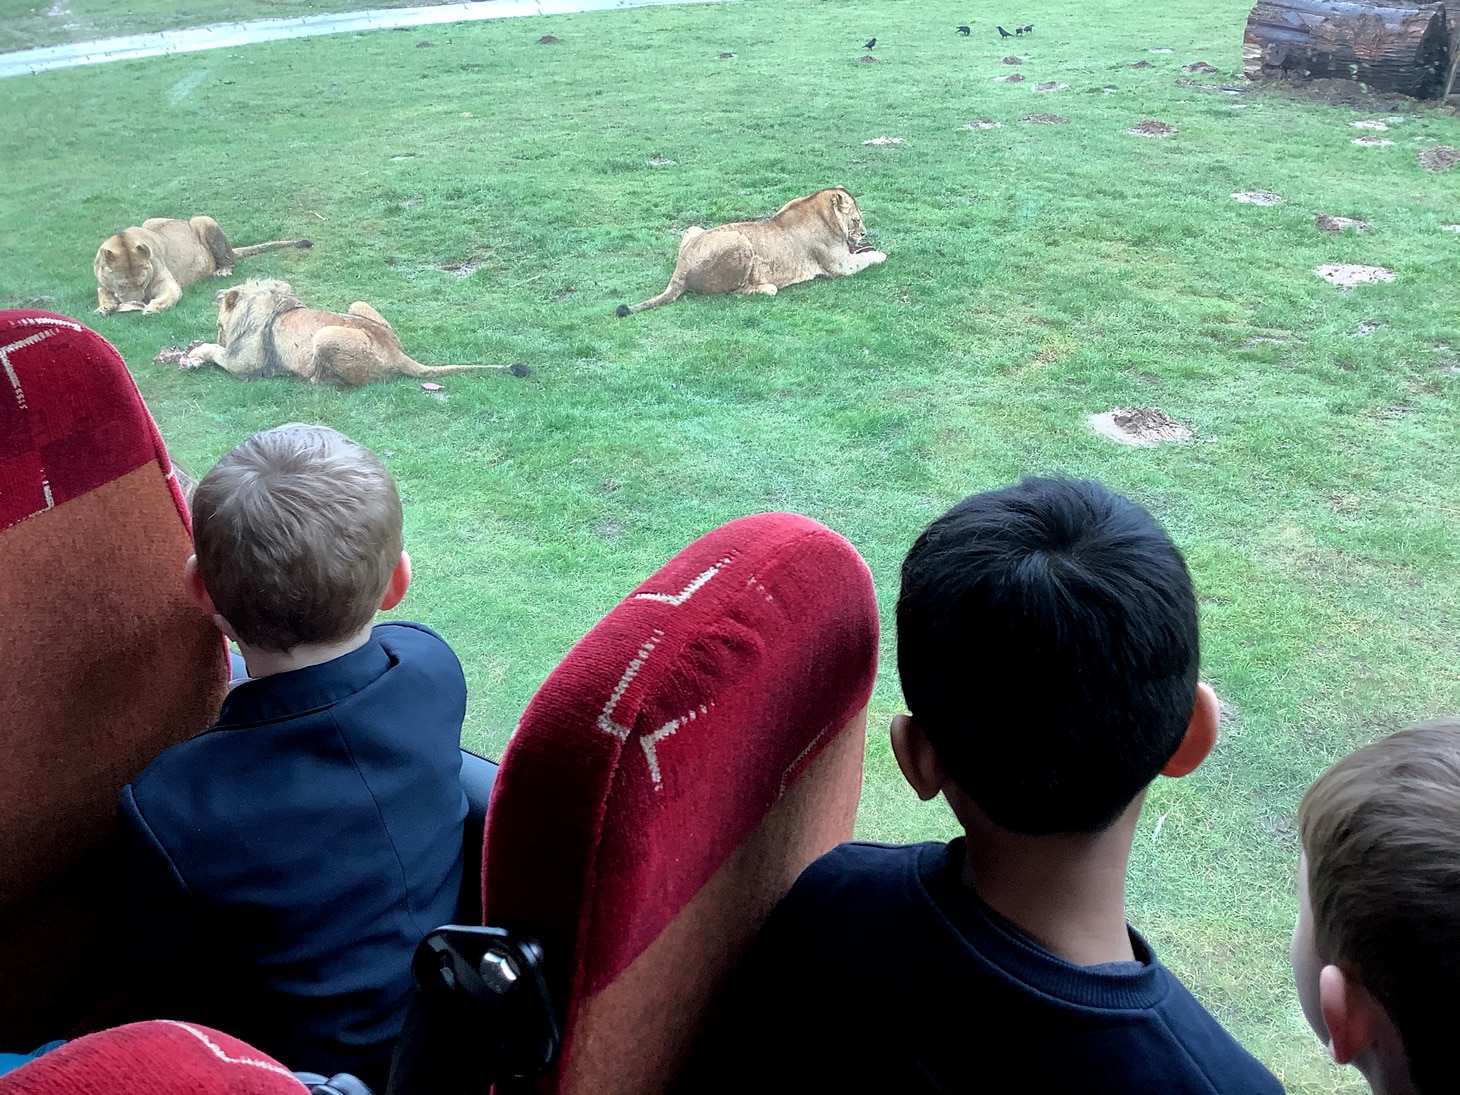 Year 2 at Woburn seeing the lions